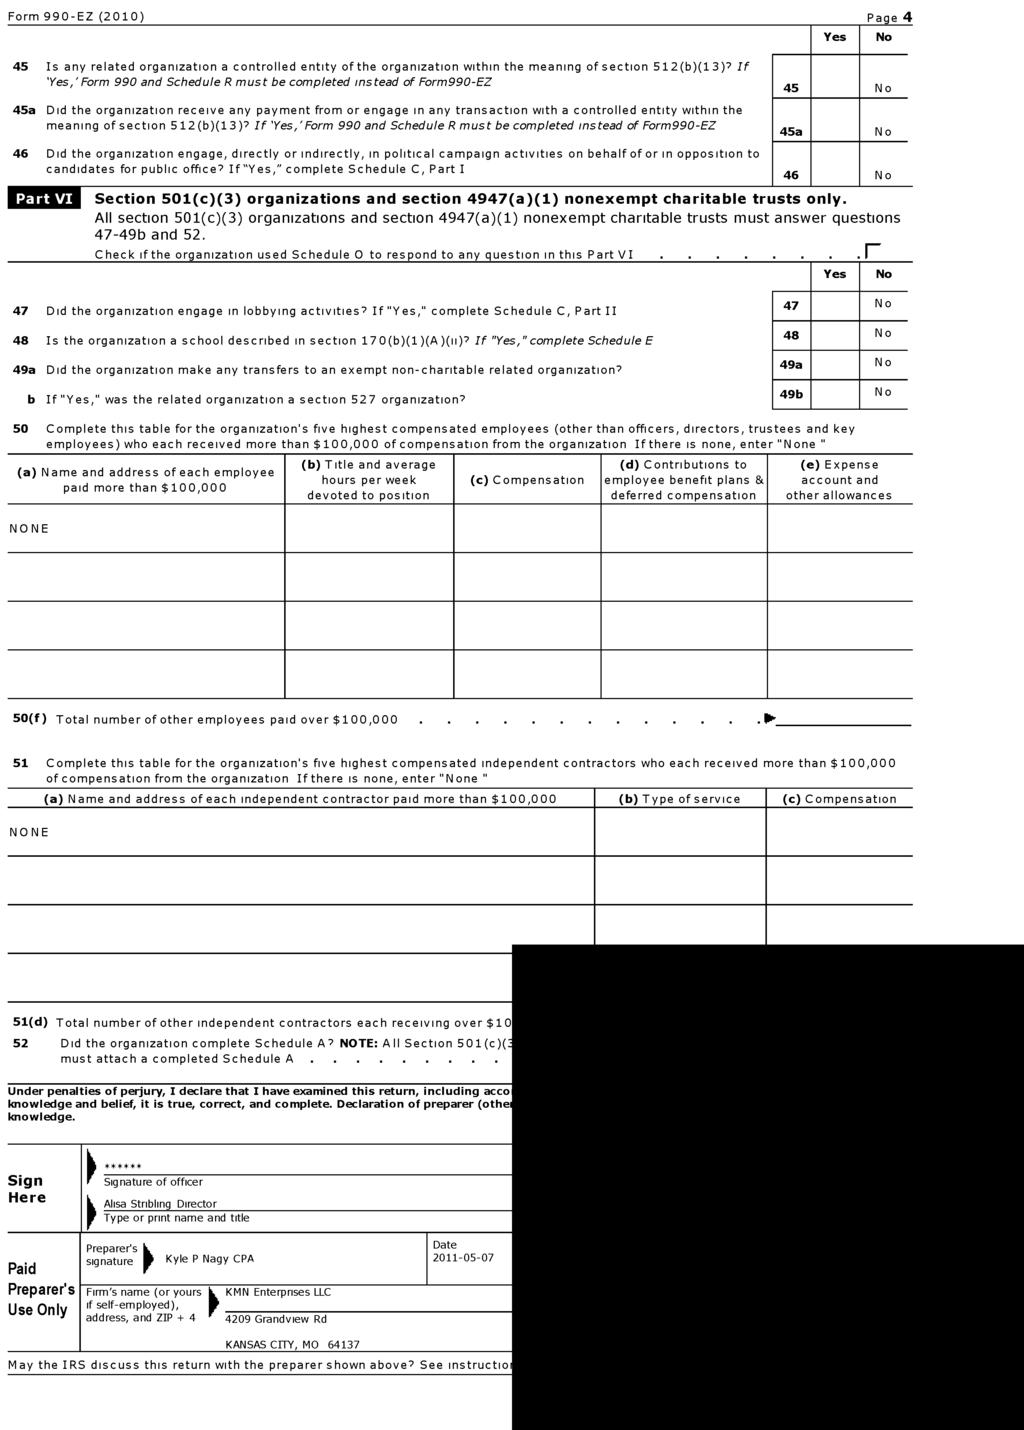 Form 990-EZ ( 2010) Page 4 Yes No 45 Is any related organization a controlled entity of the organization within the meaning of section 512(b)(13)?